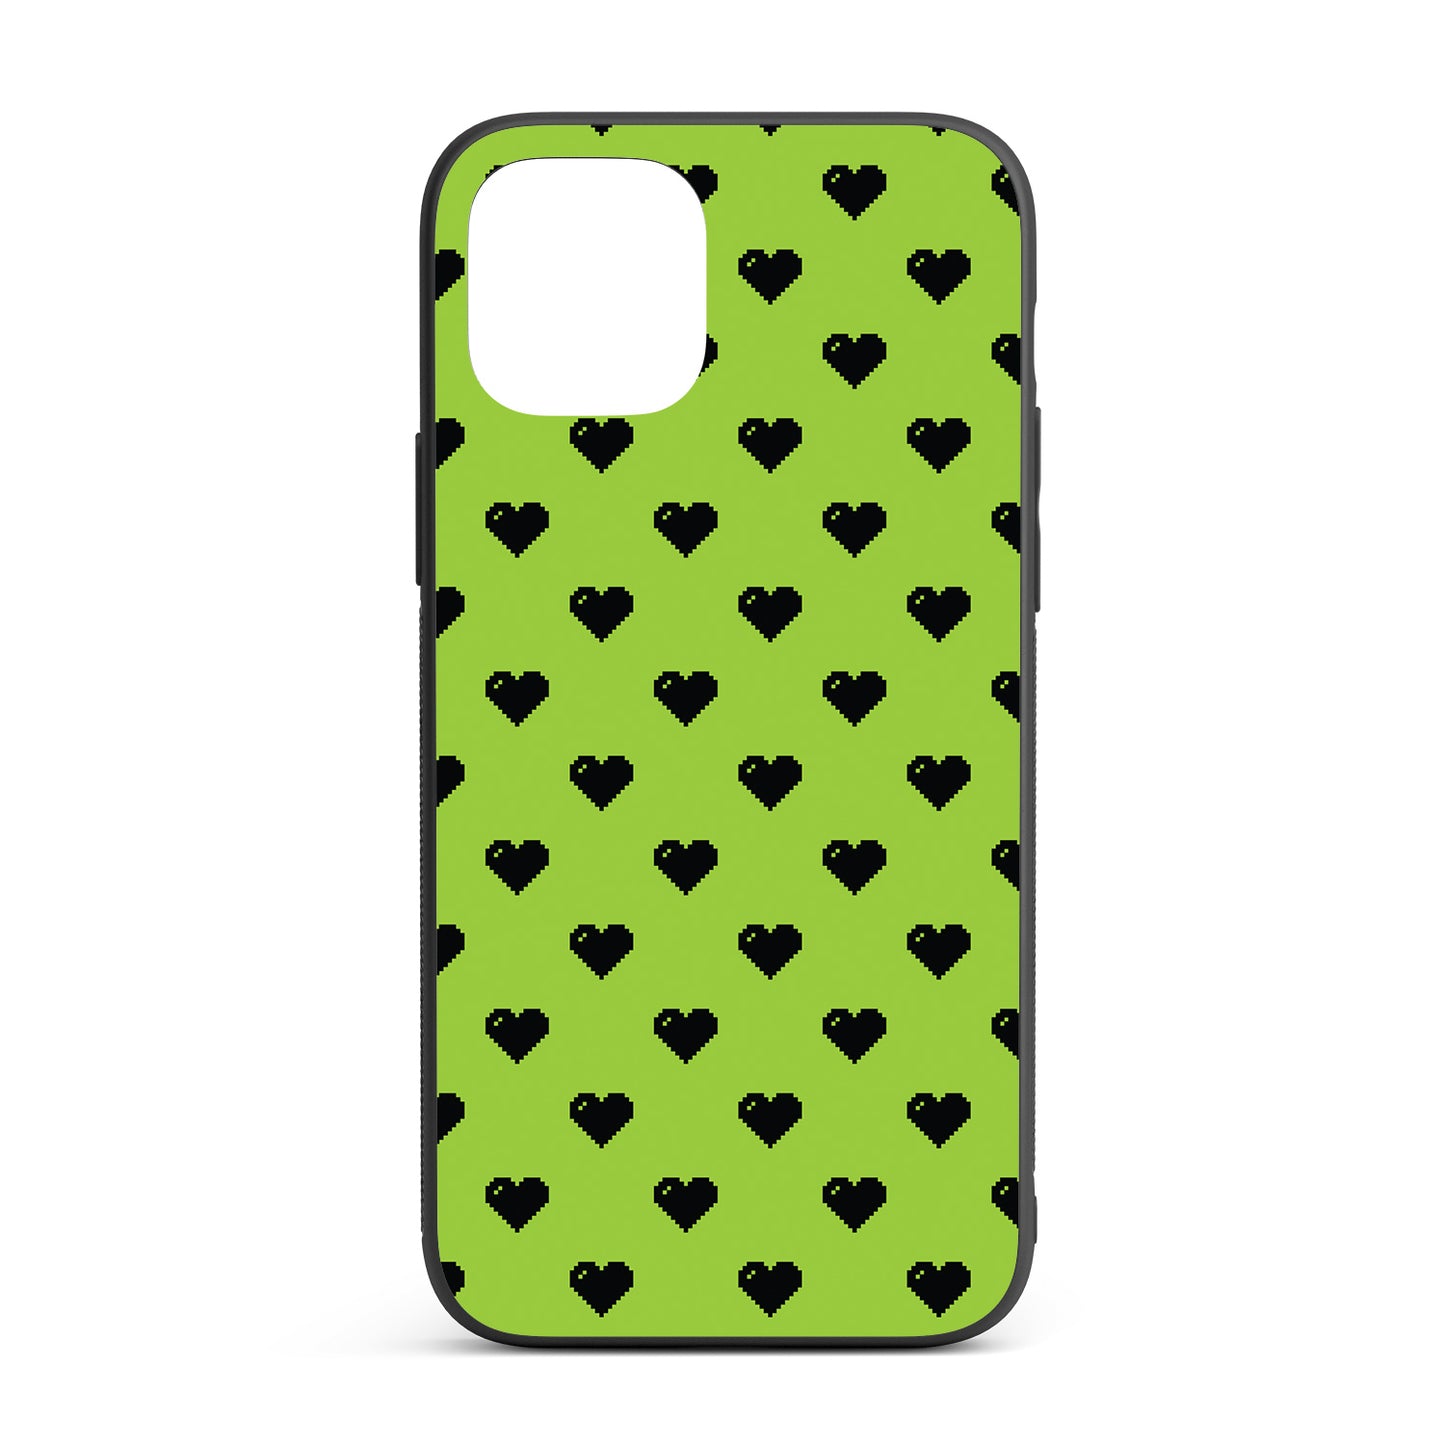 Pixelated Heart iPhone glass case